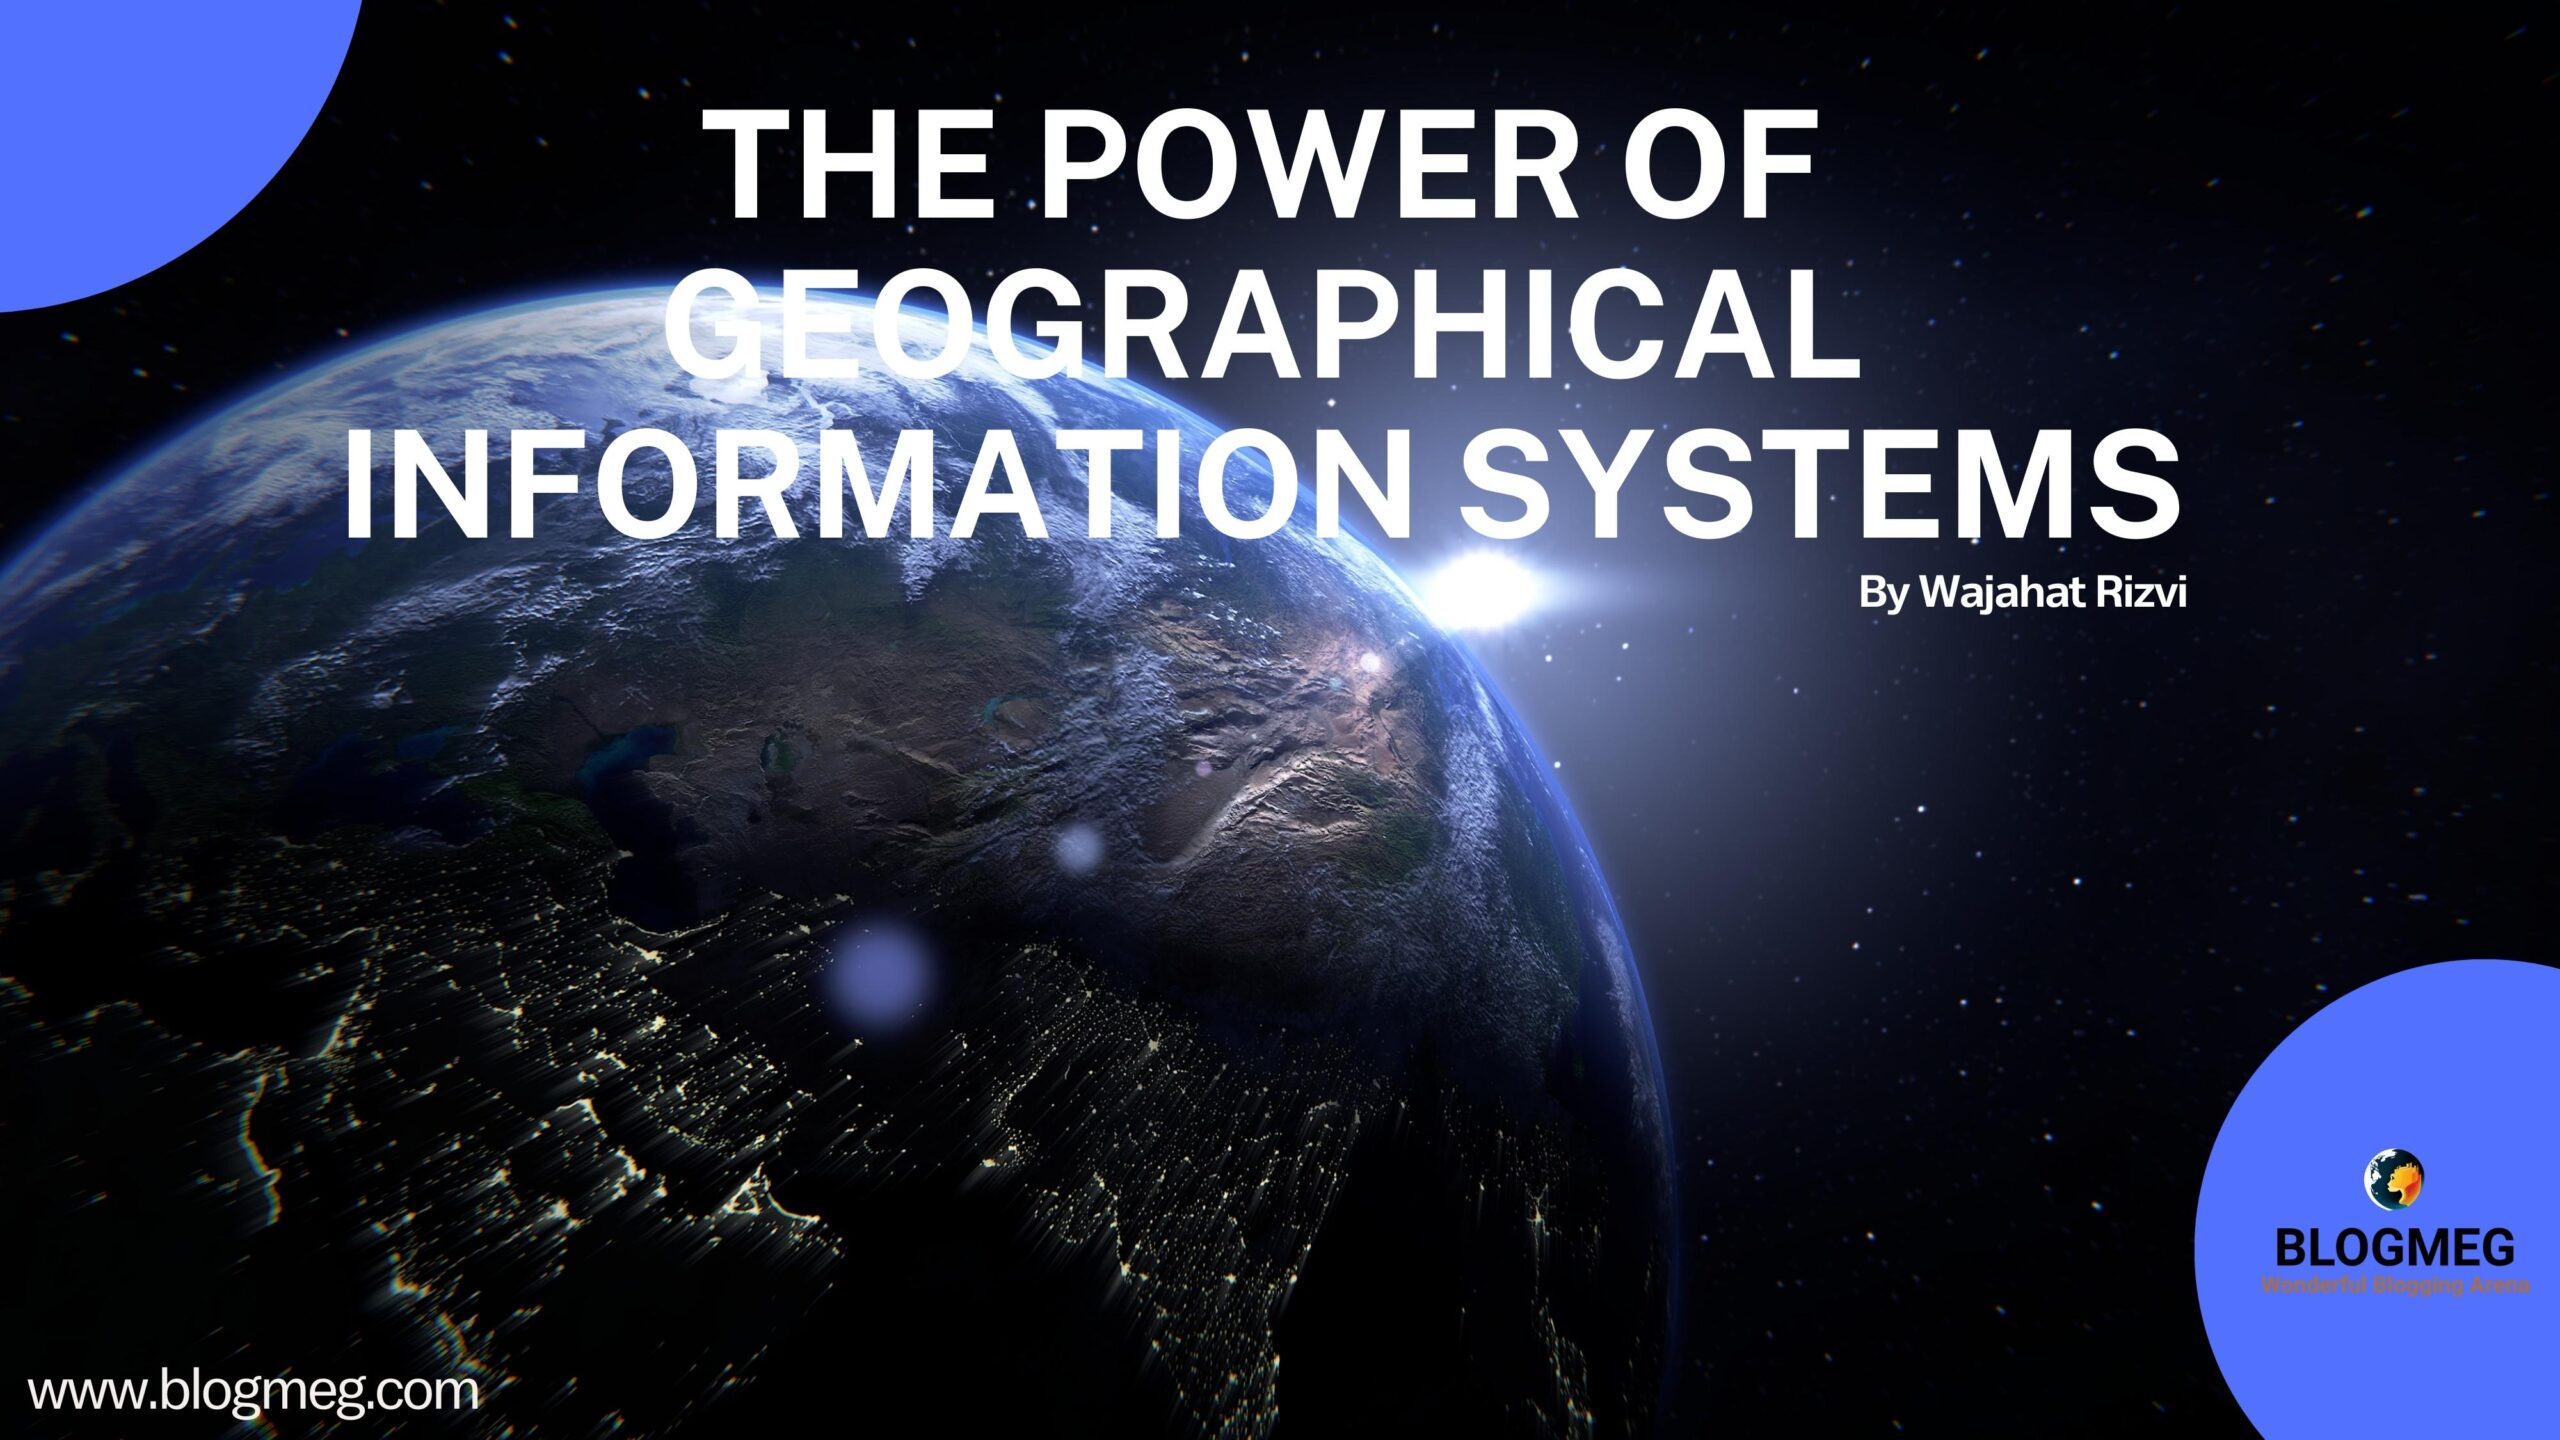 The Power of Geographical Information Systems